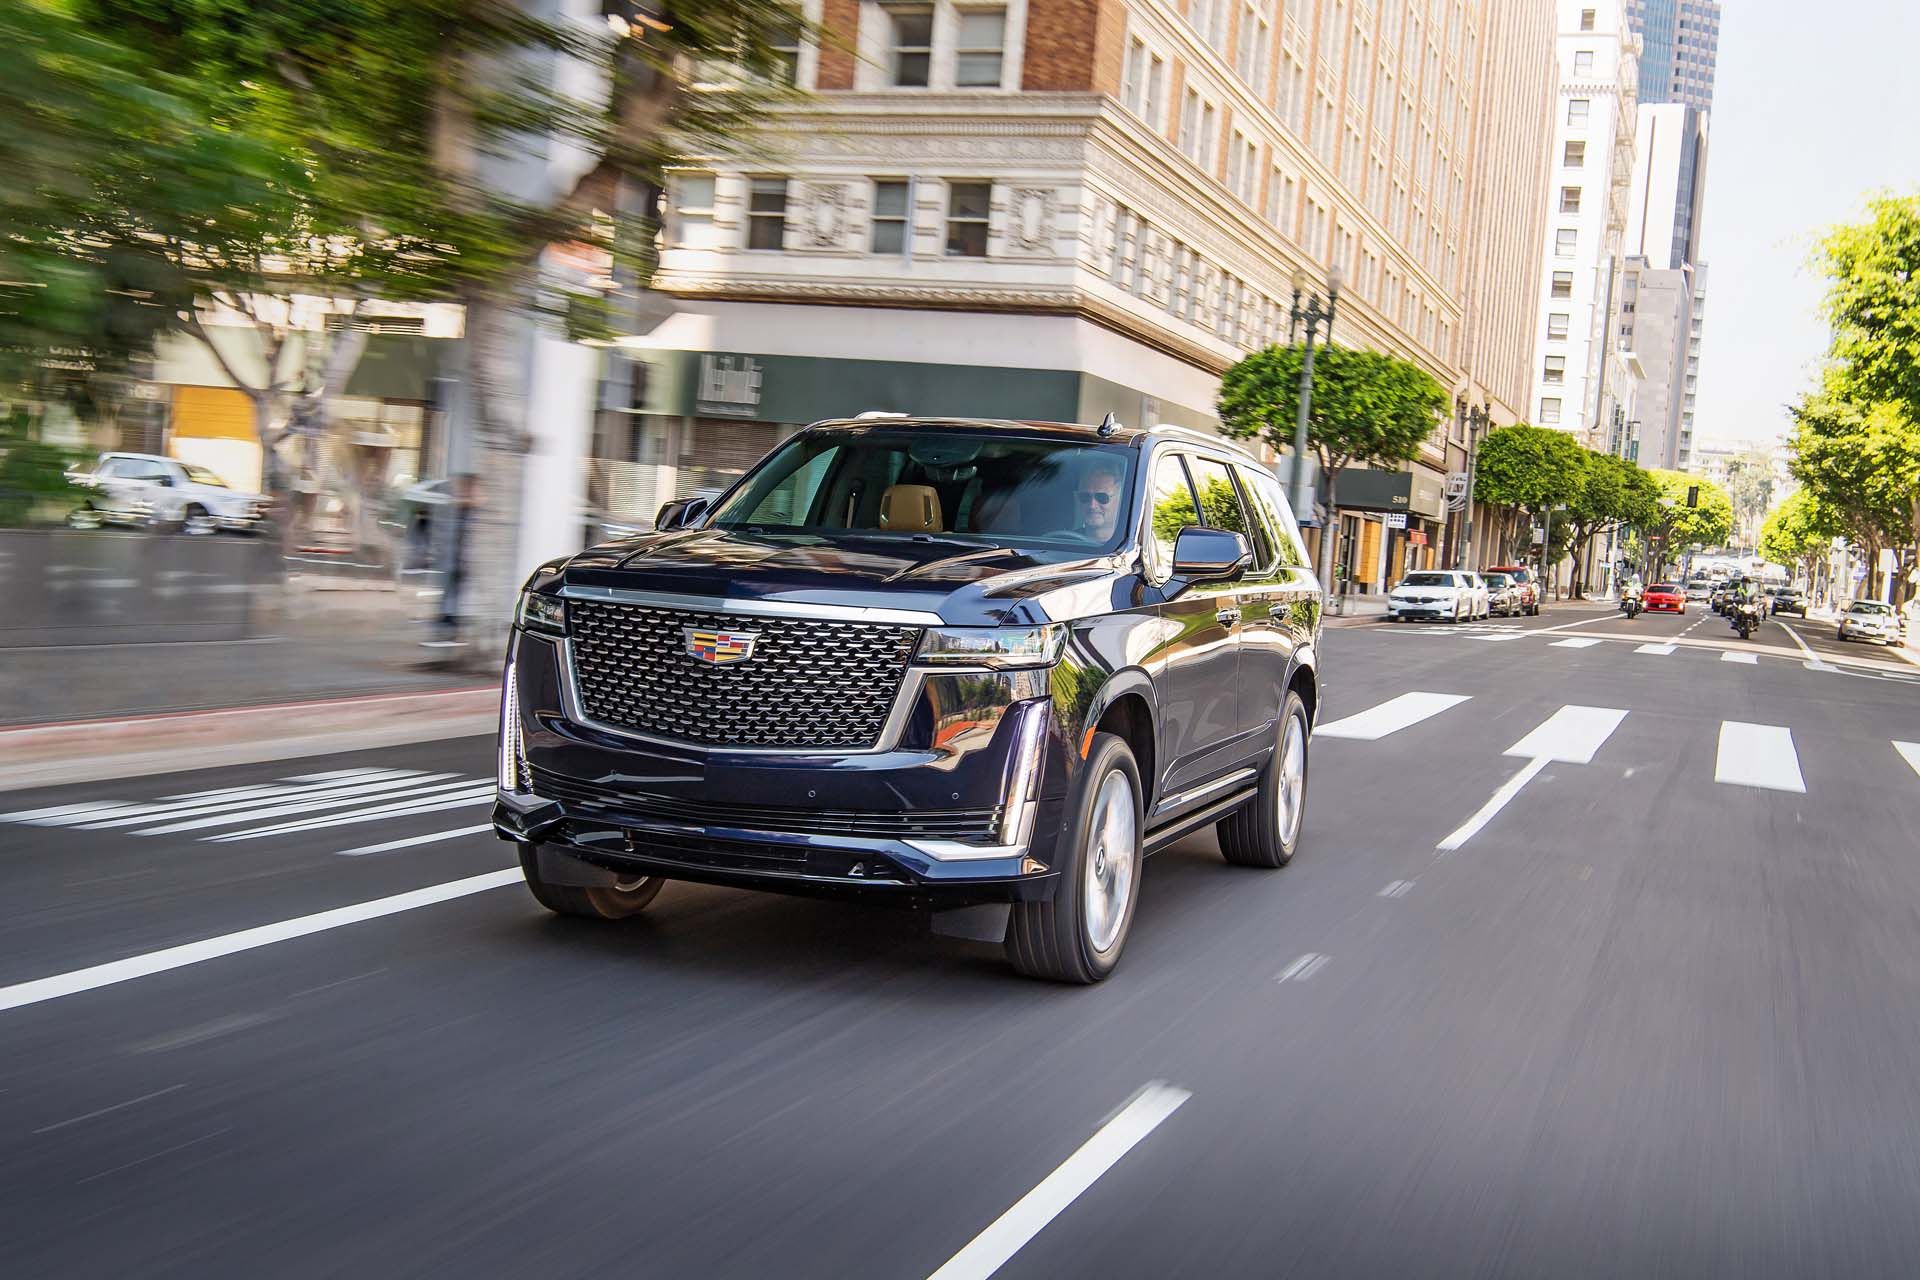 First drive review: 2021 Cadillac Escalade intimidates with size, ingratiates with tech